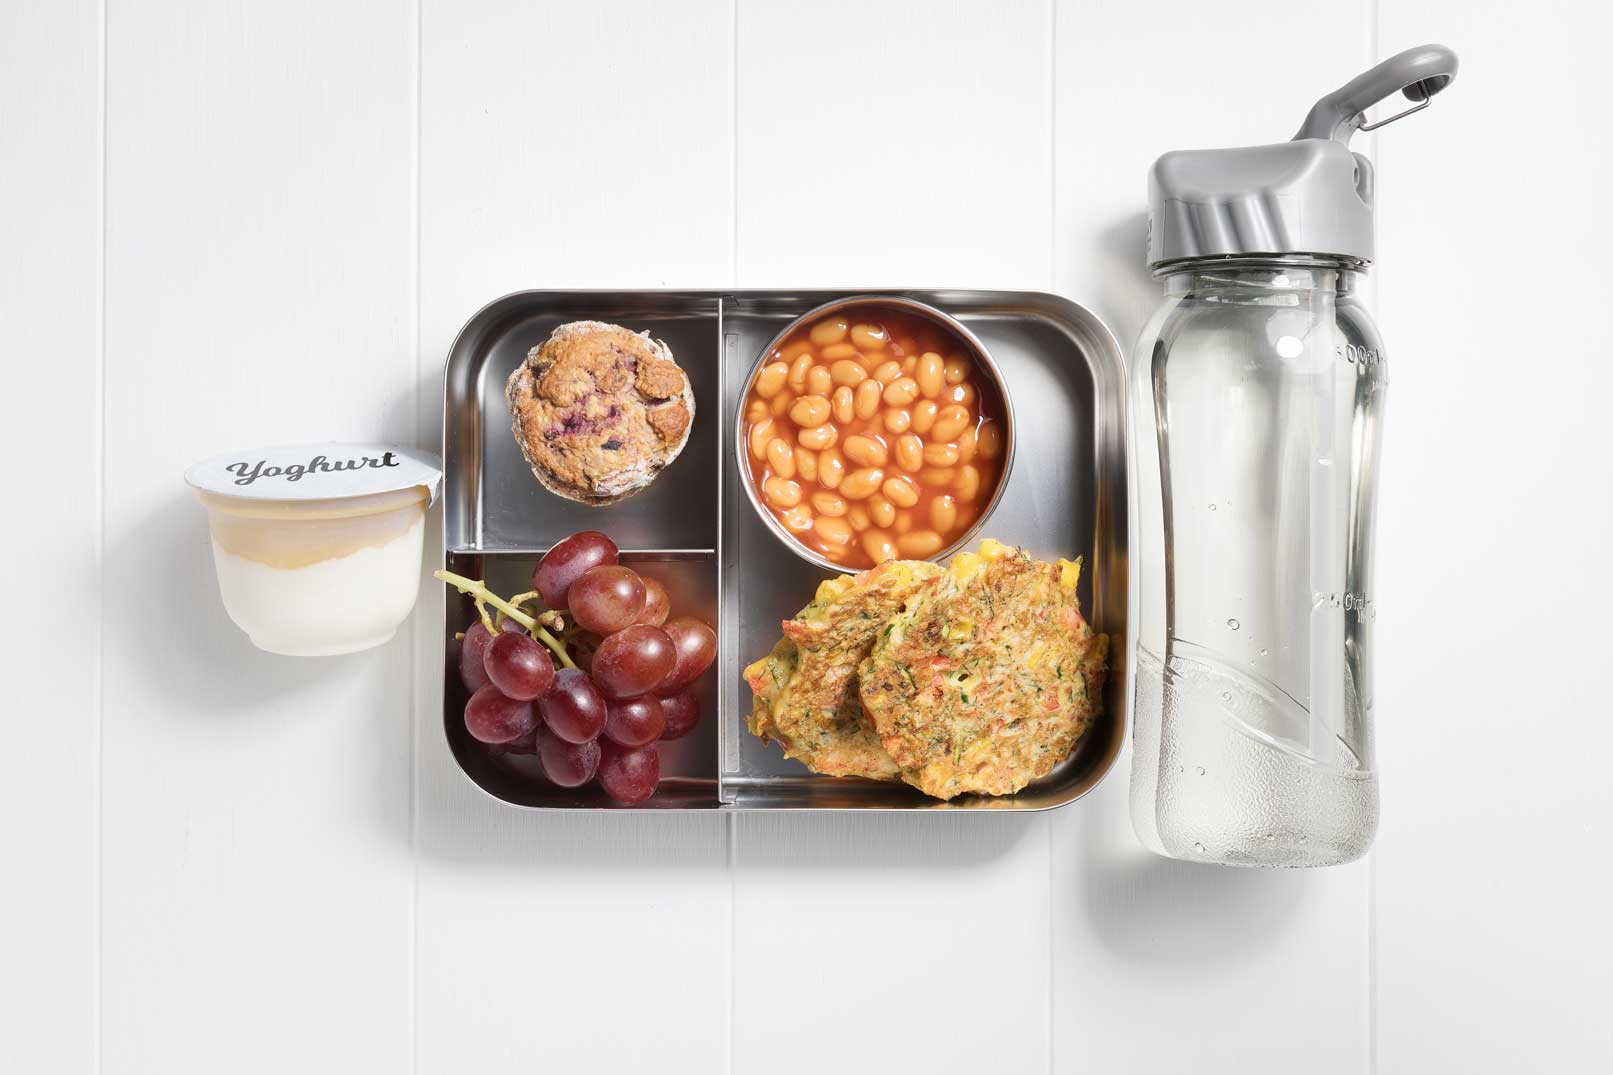 Image of a packed lunch box with two zucchini and corn fritters, baked beans, mixed berry scone, grapes and a yoghurt tub and water bottle on the side